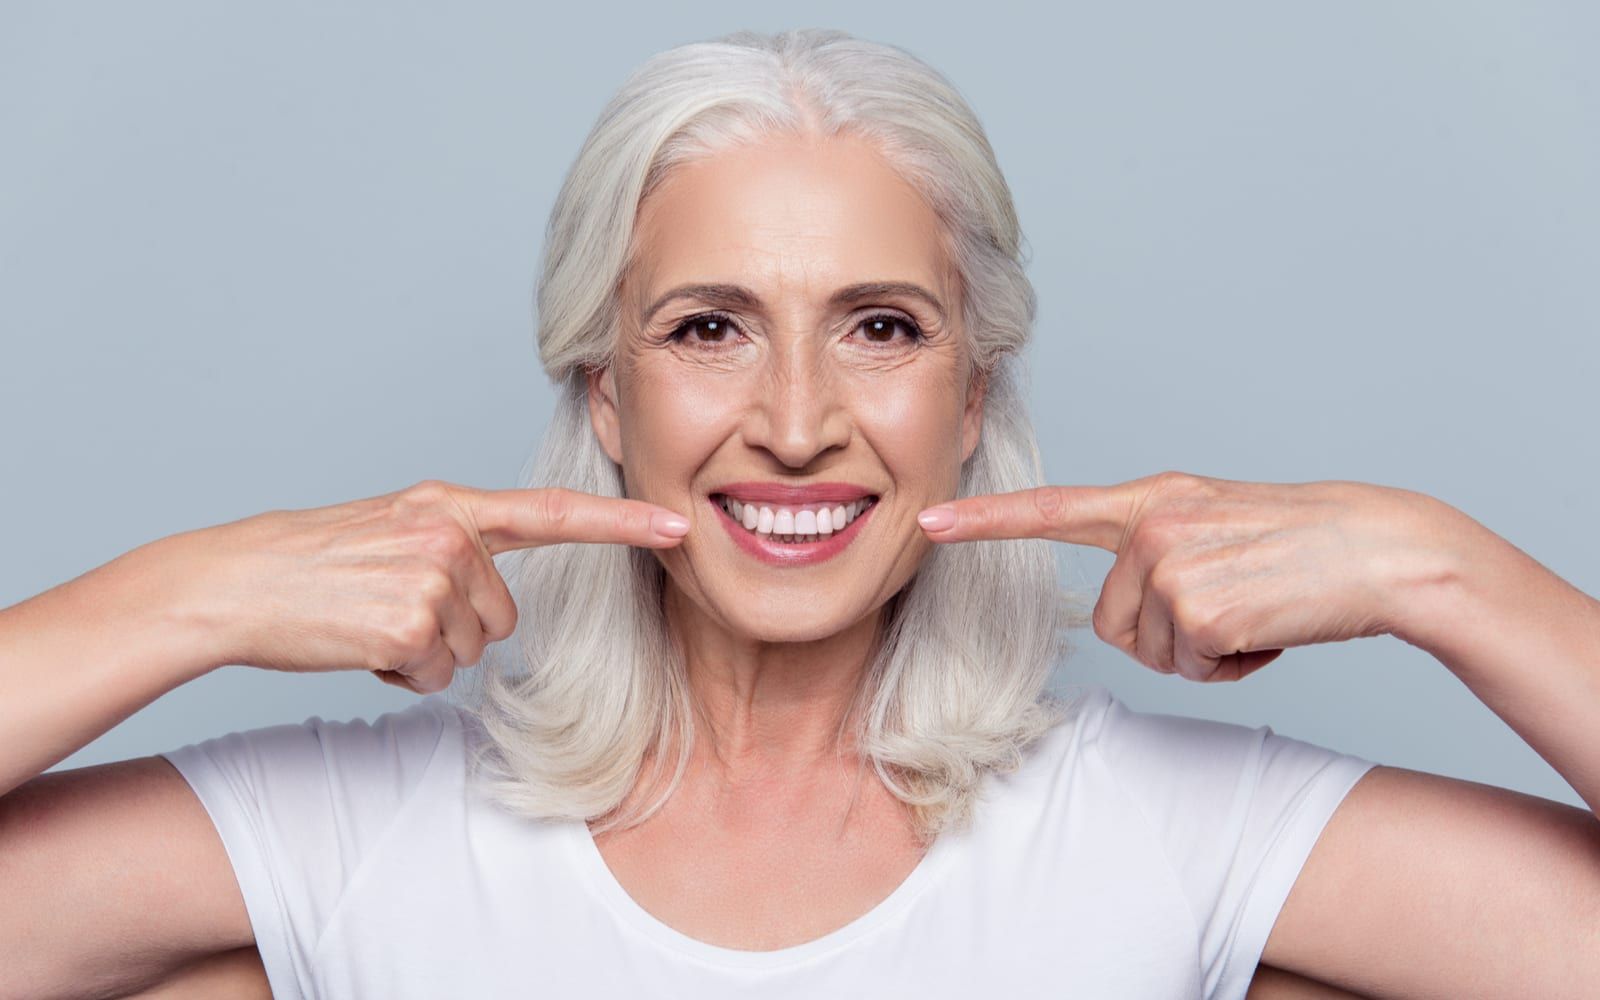 Smiling woman pointing at new dental implants